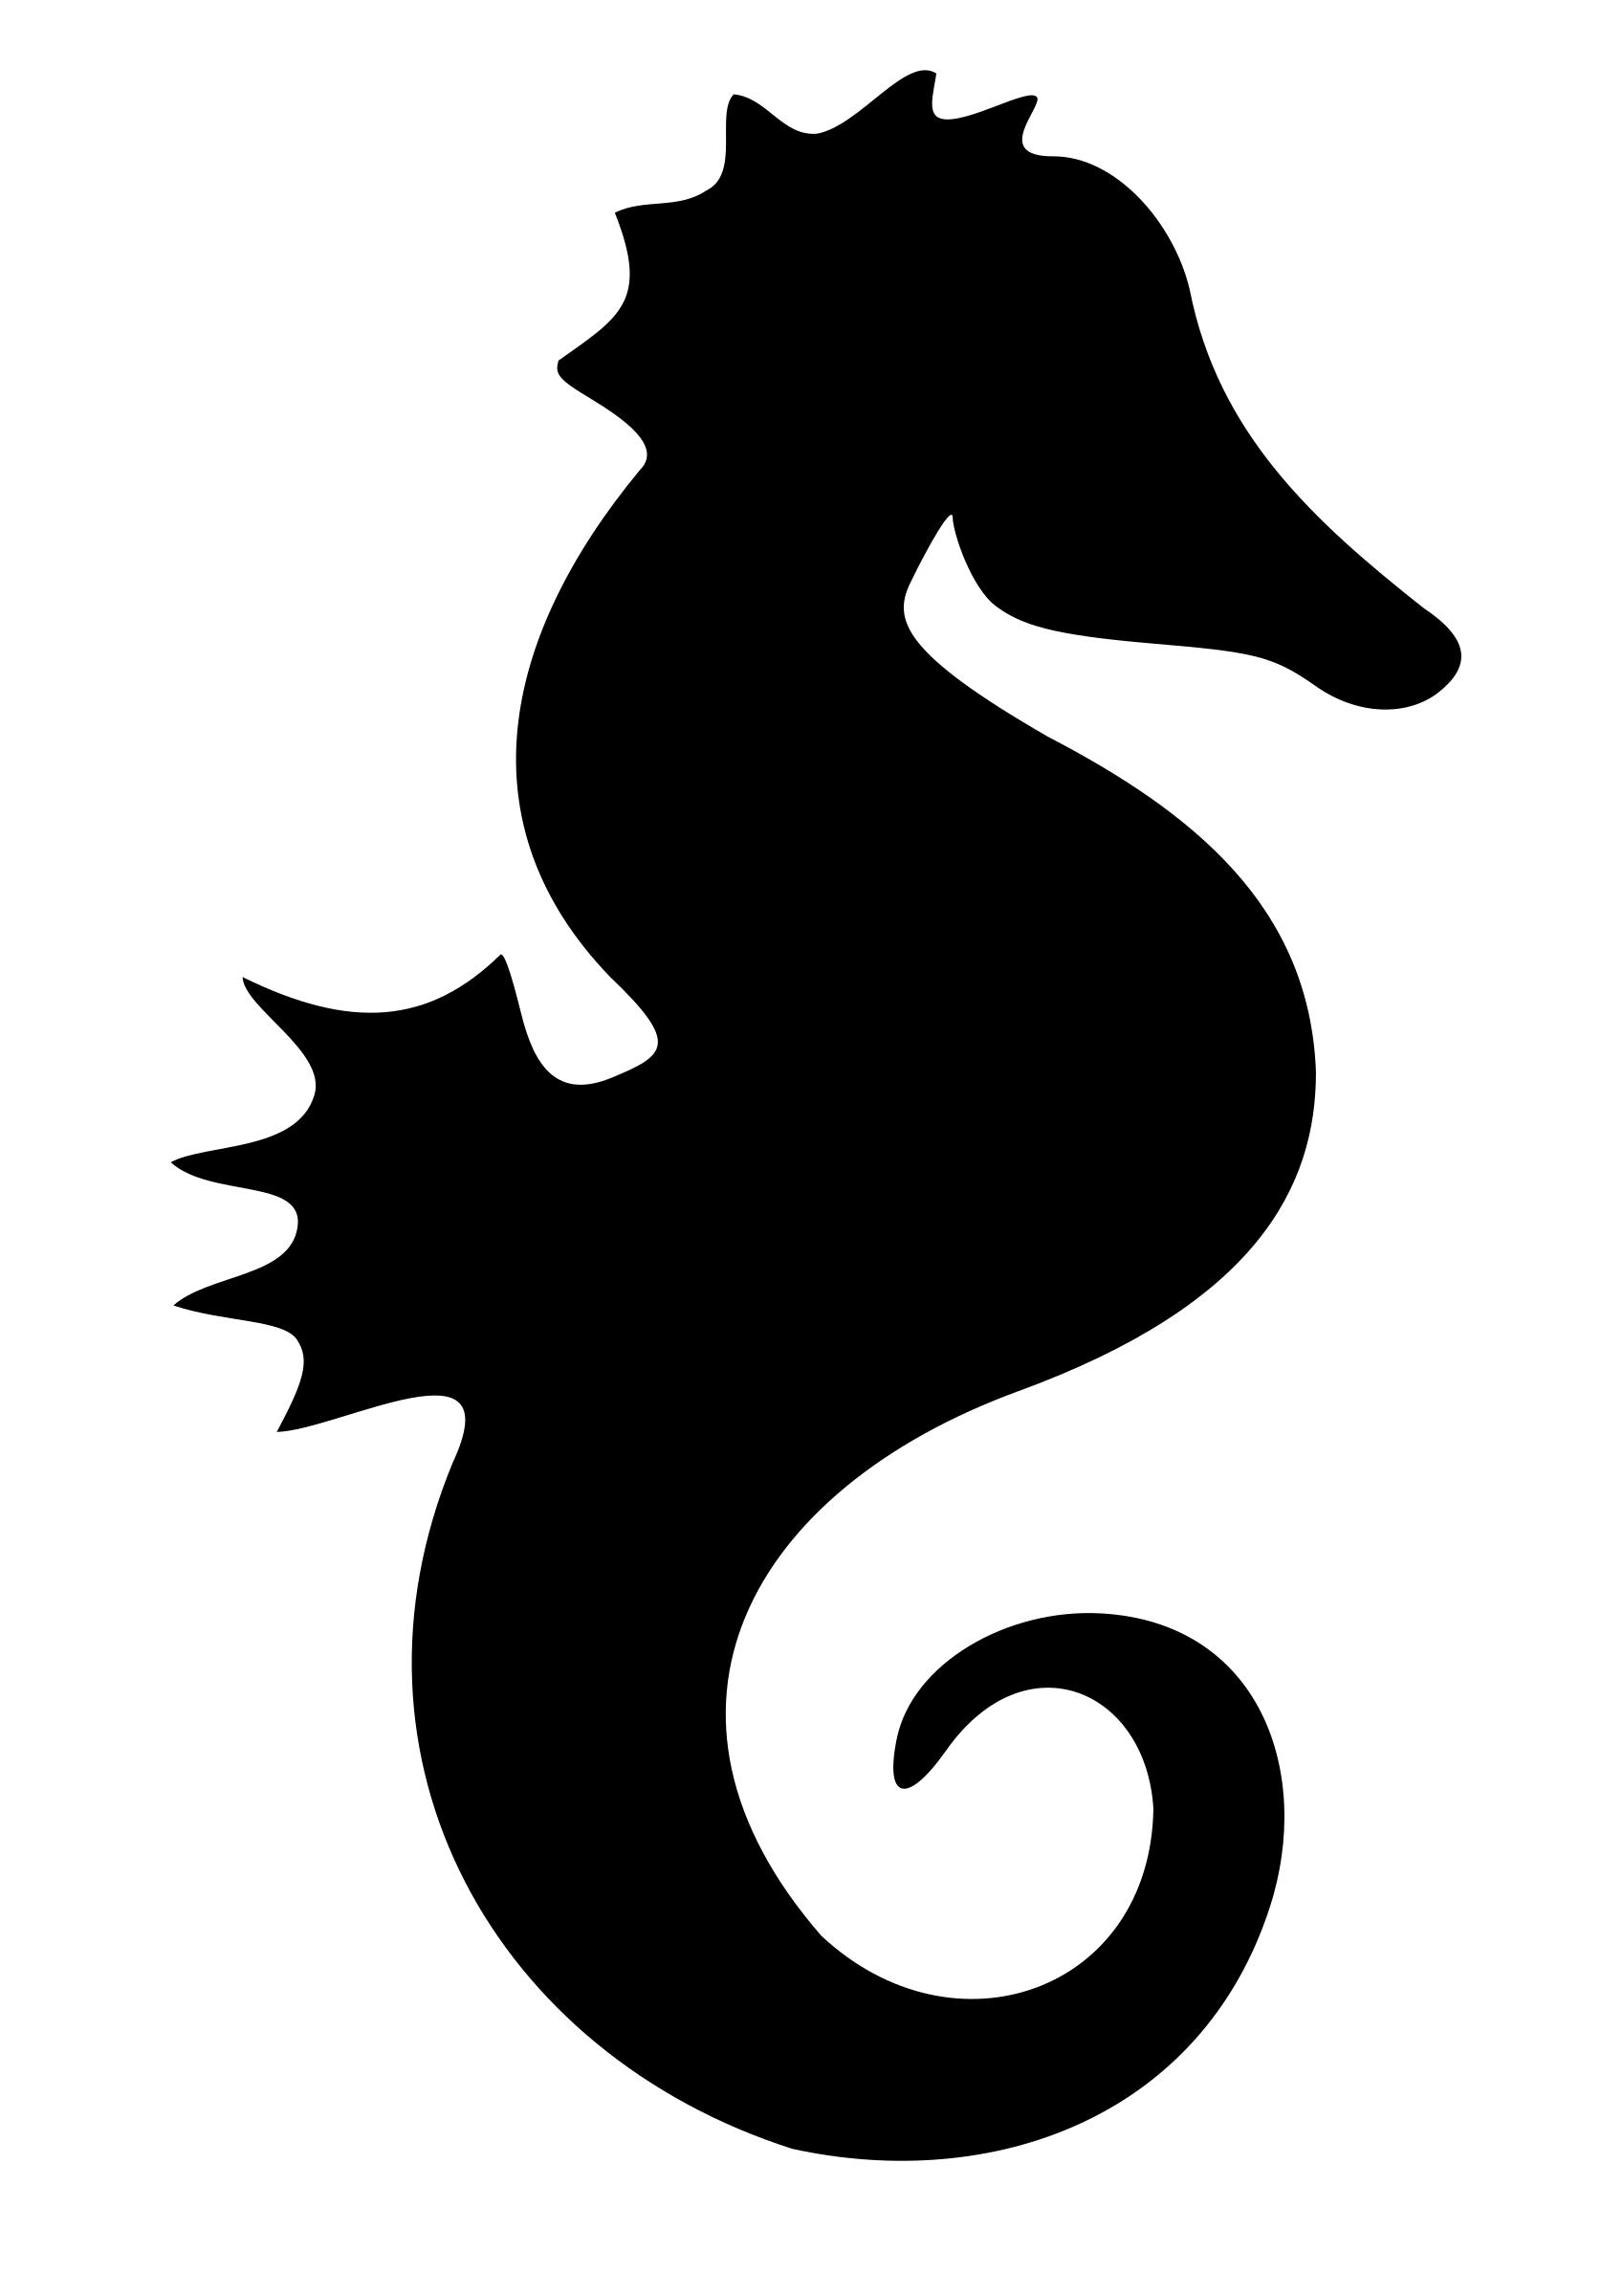 Seahorse Silhouette png